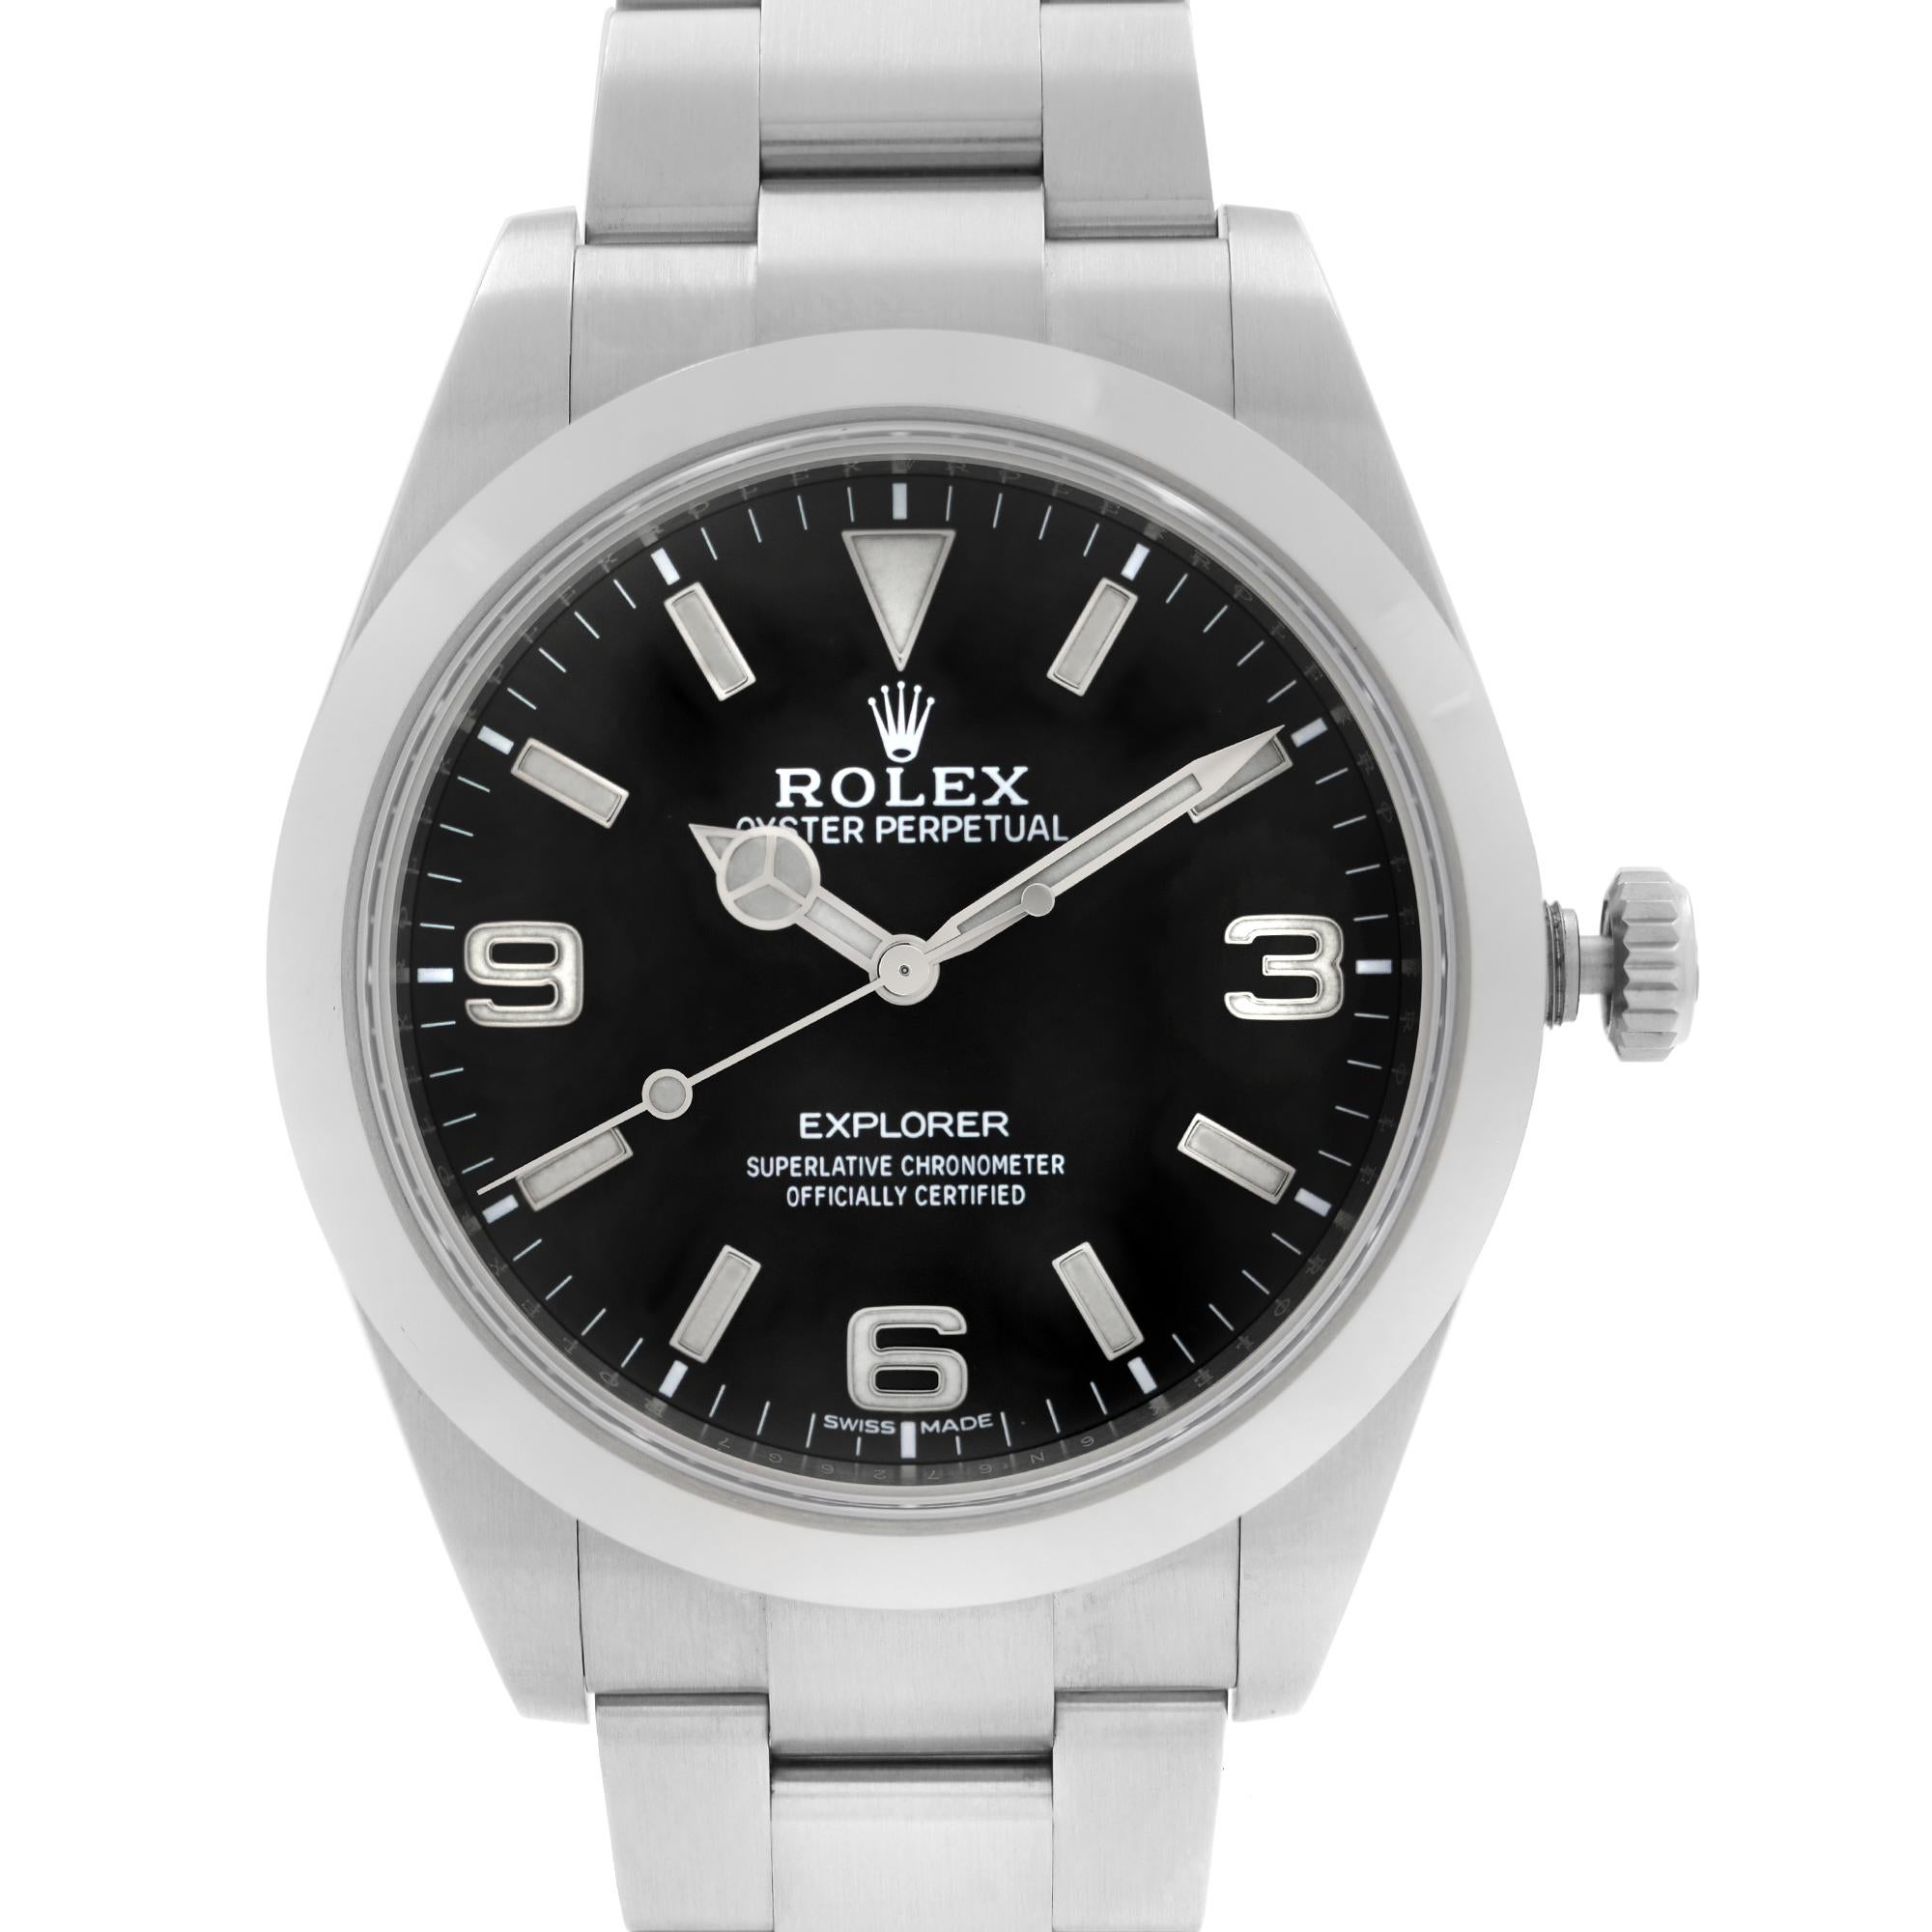 New Old Stock 2020 new Style card. Full Lume MK2 Dial. Rolex Explorer 39mm Steel Black Dial Automatic Oyster Bracelet Smooth Bezel Men's Watch 214270. This Beautiful Timepiece Features: Silver-Tone Stainless Steel Case with a Silver-Tone Oyster